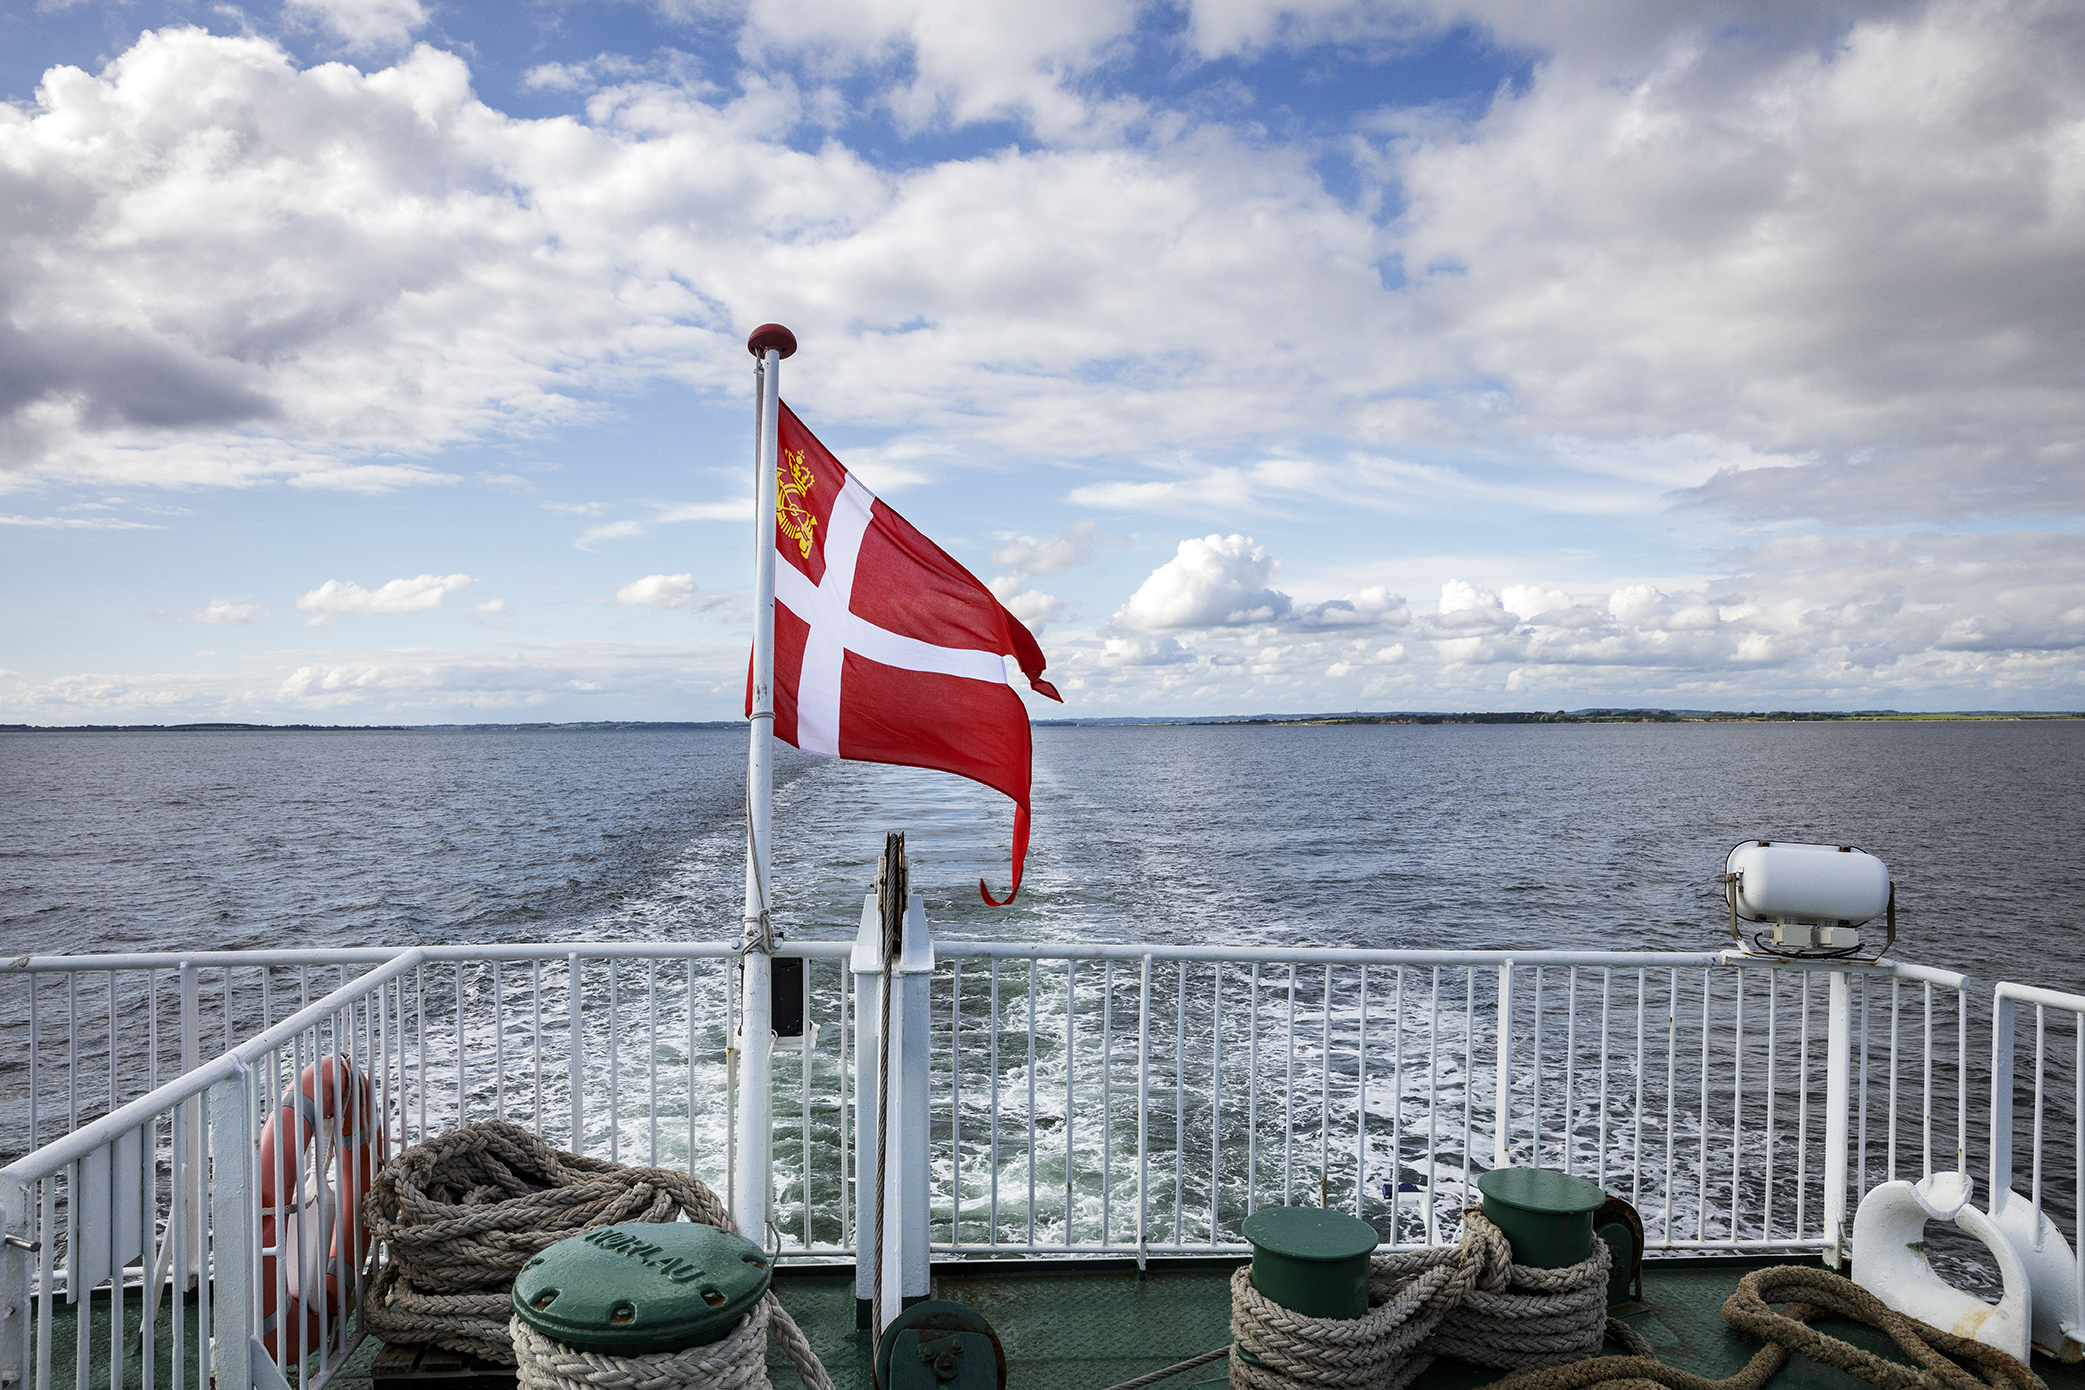 The Aereo-ferries operate three routes with a combined four ferries between Ærø and Funen/Jutland.